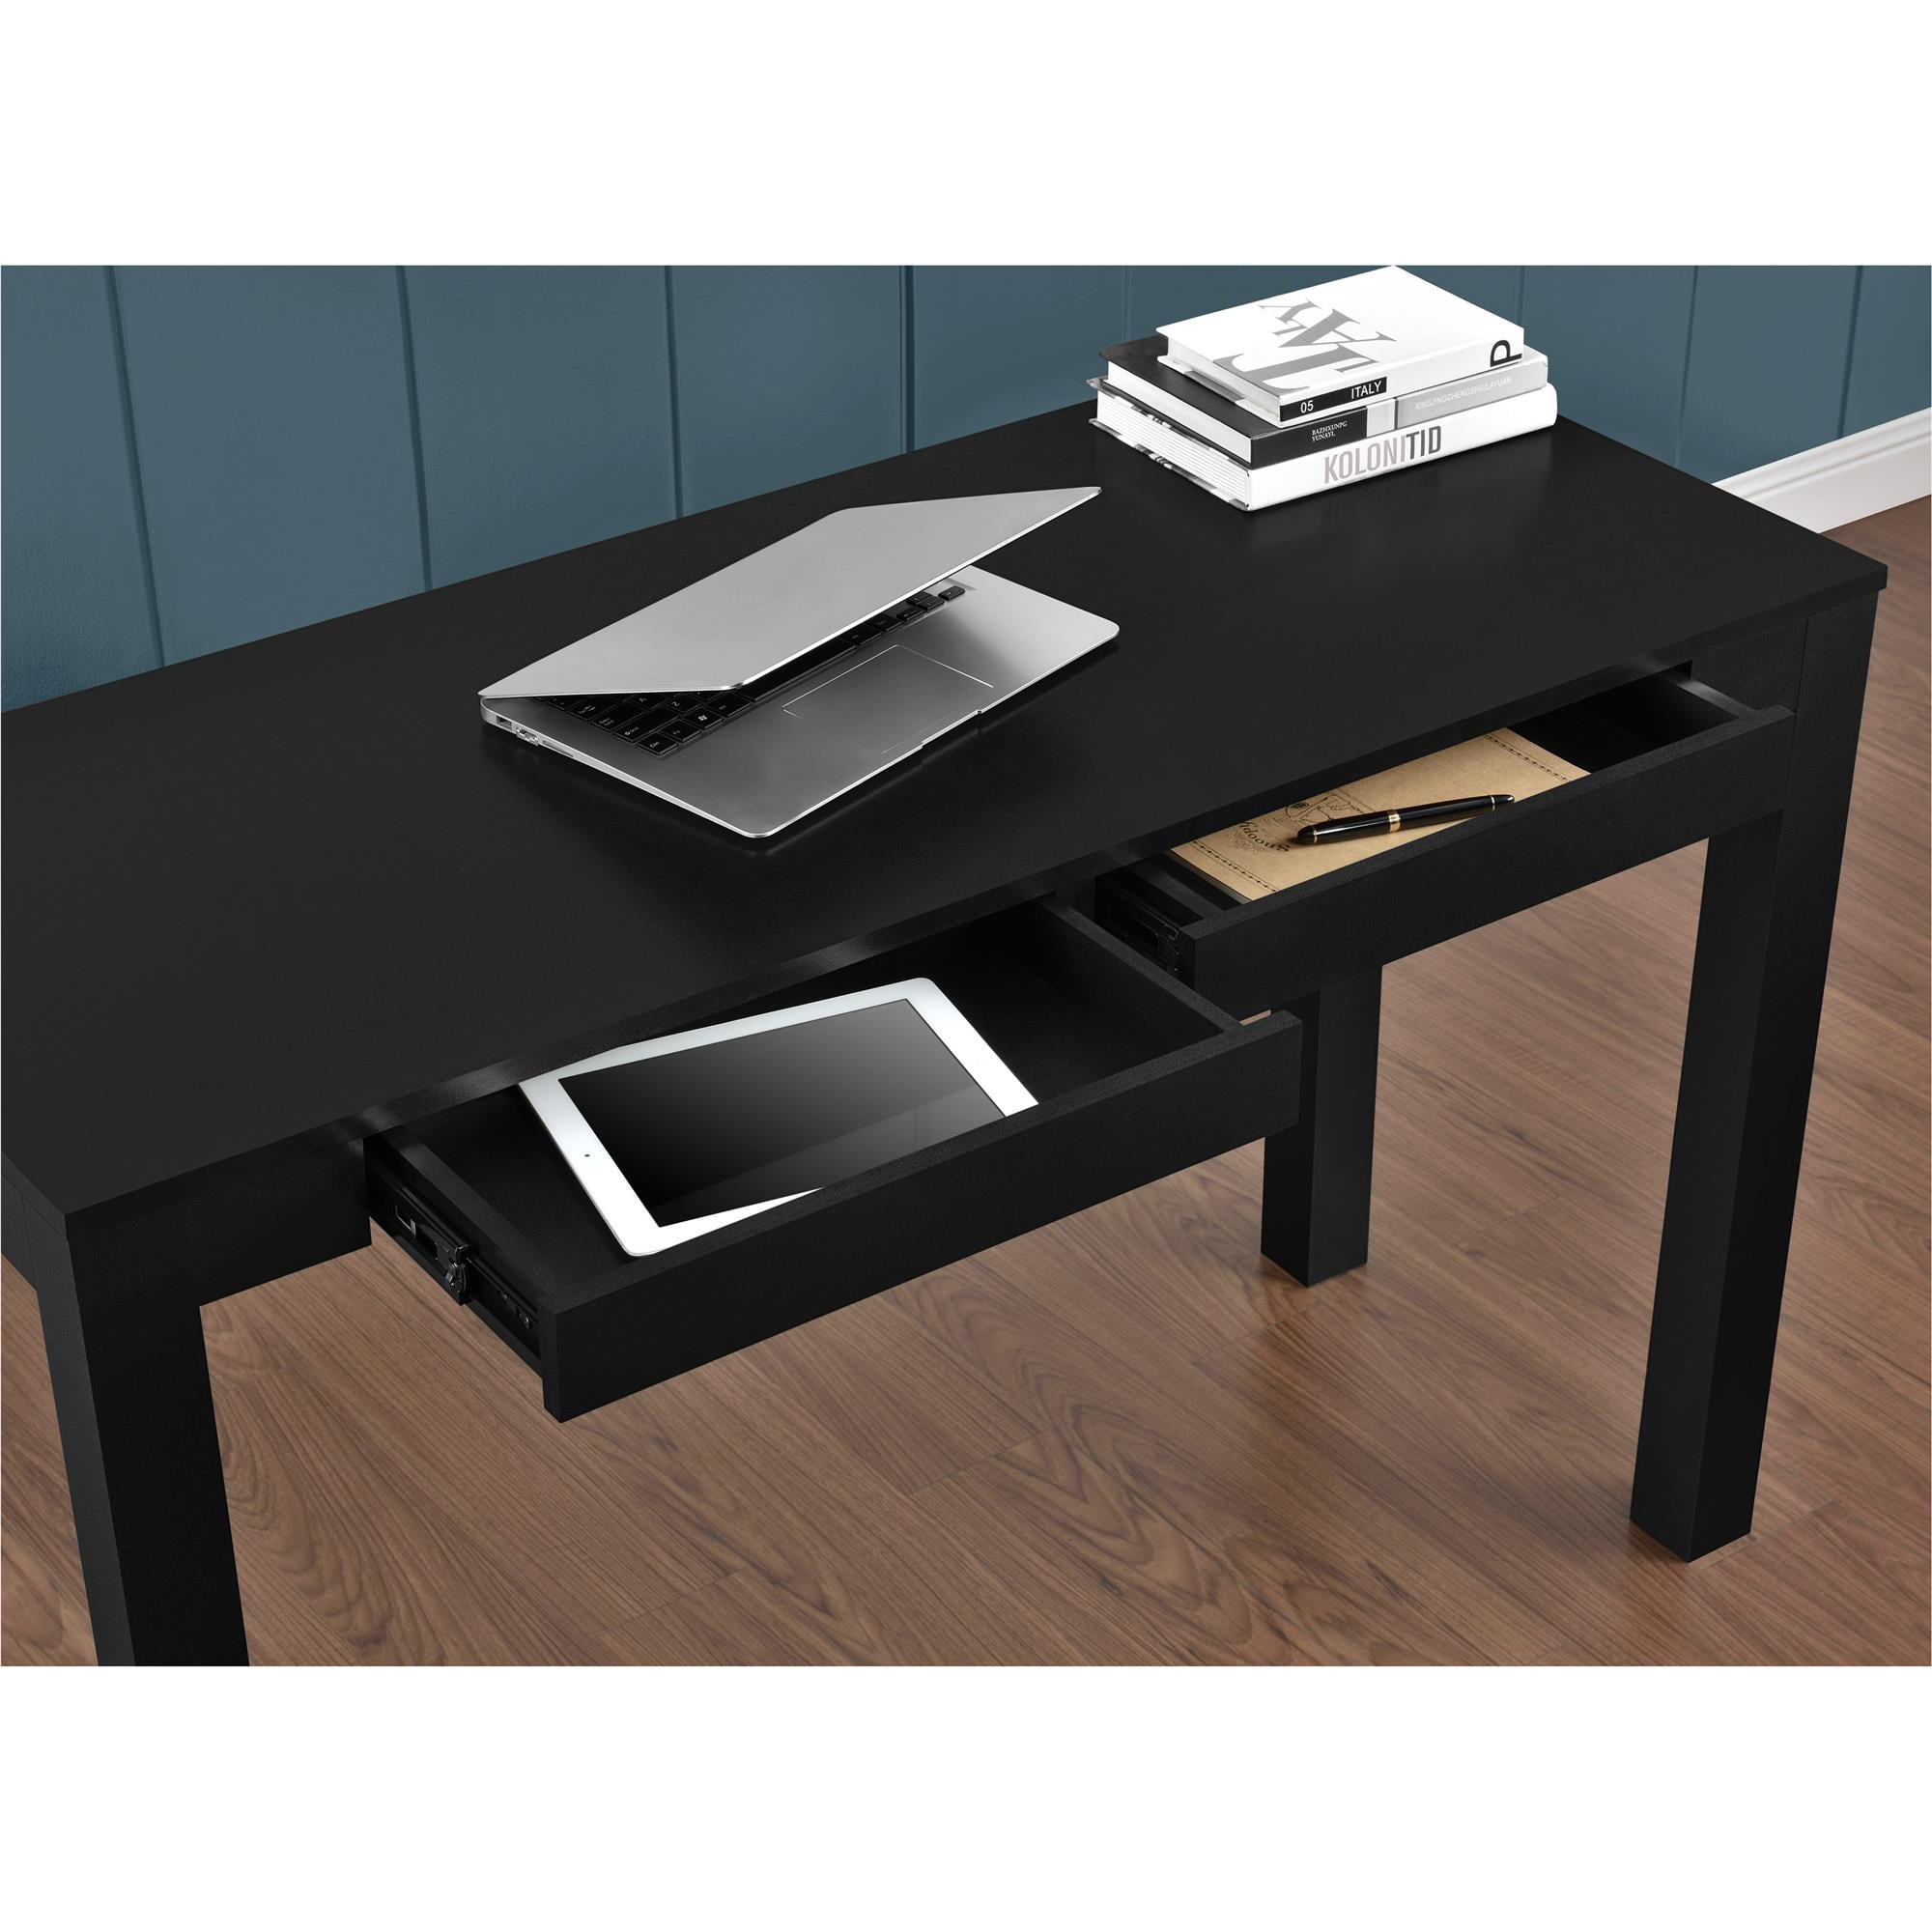 Ameriwood Home Hanley 56 in. L-Shaped Faux Terrazzo Computer Desk with 2-Shelves